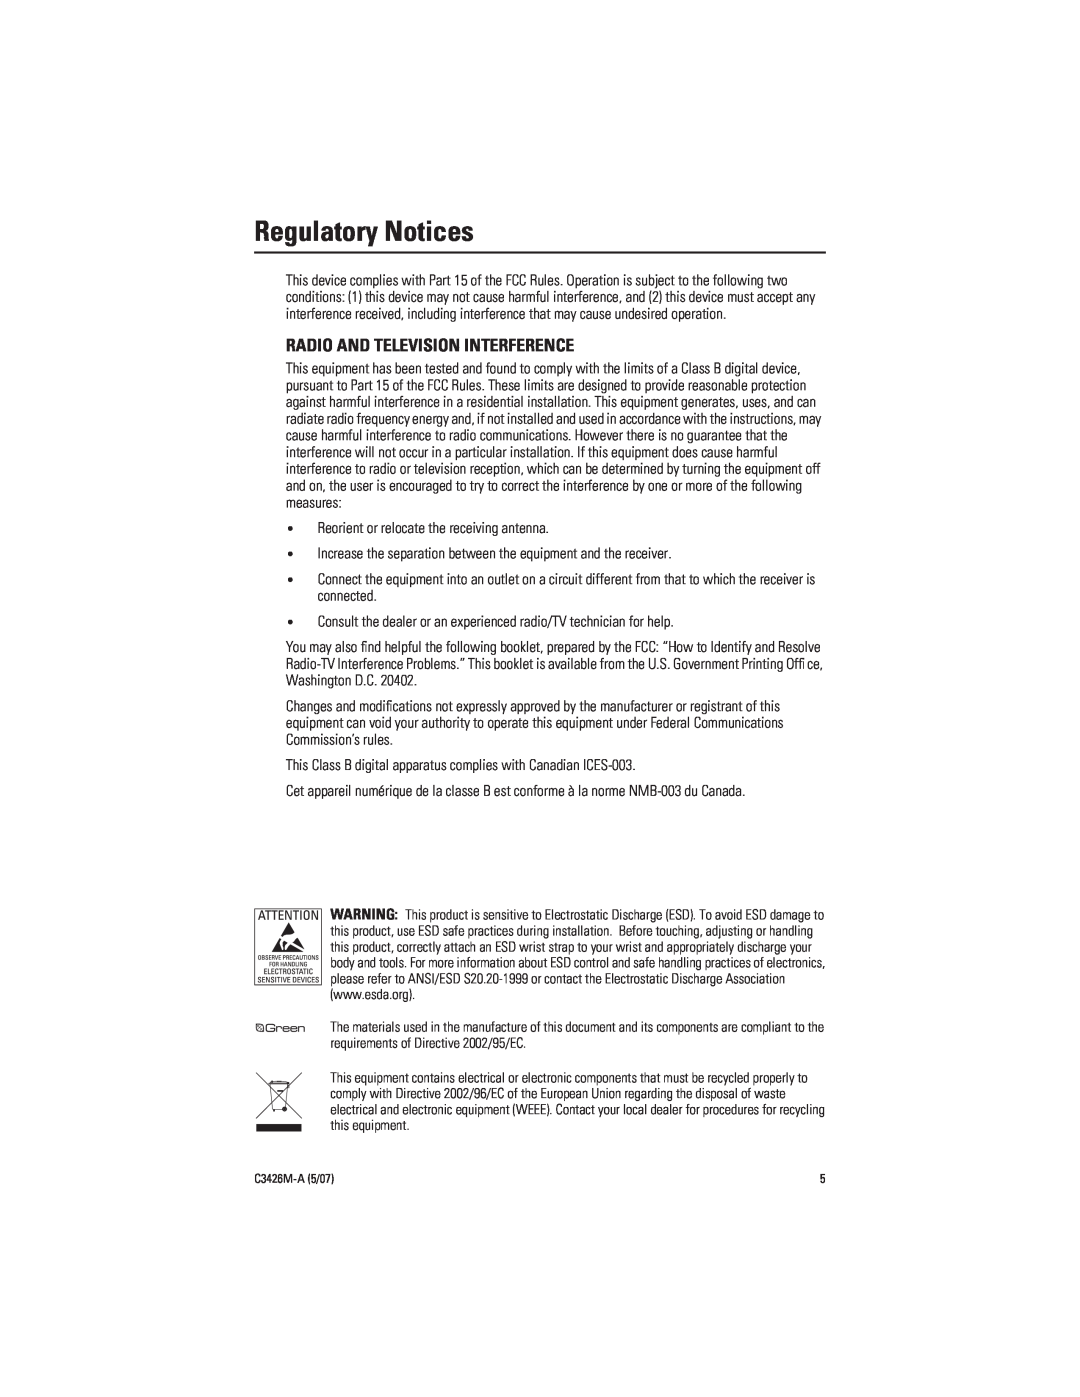 Pelco C3426M-A (5/07) manual Regulatory Notices, Radio And Television Interference 